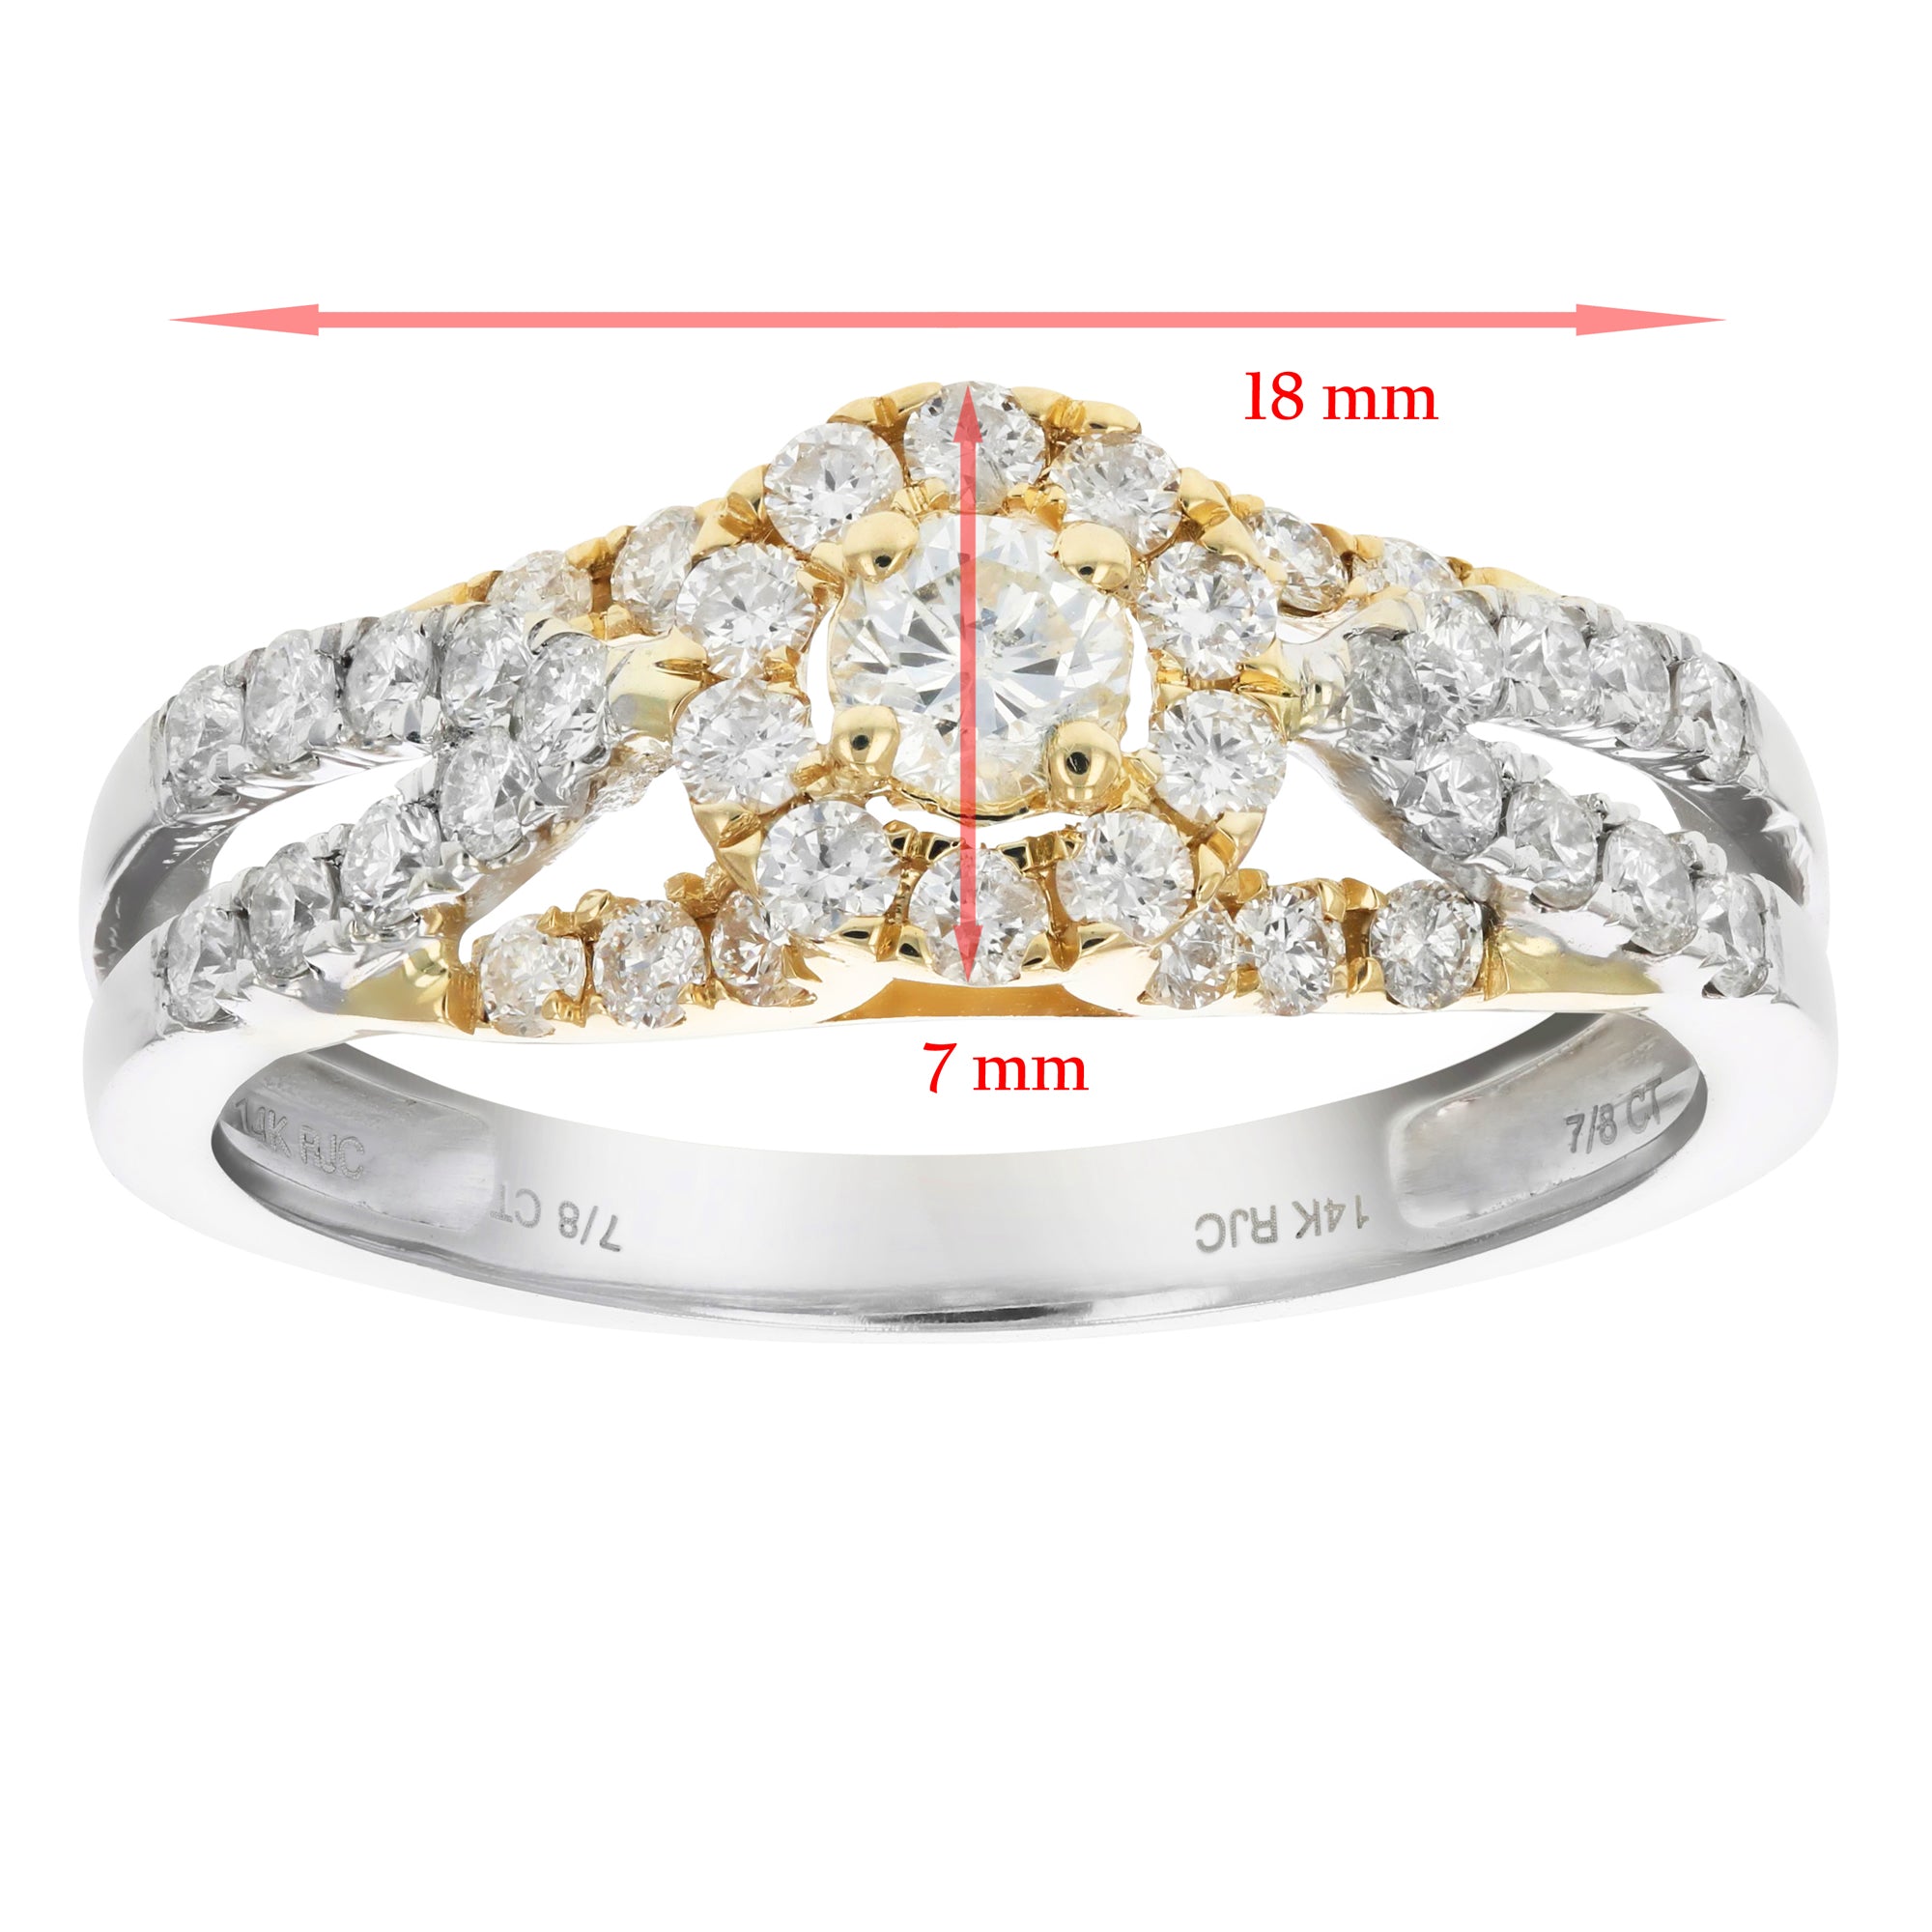 7/8 cttw Diamond Bridal Engagement Ring Set 14K Two Tone White and Yellow Gold